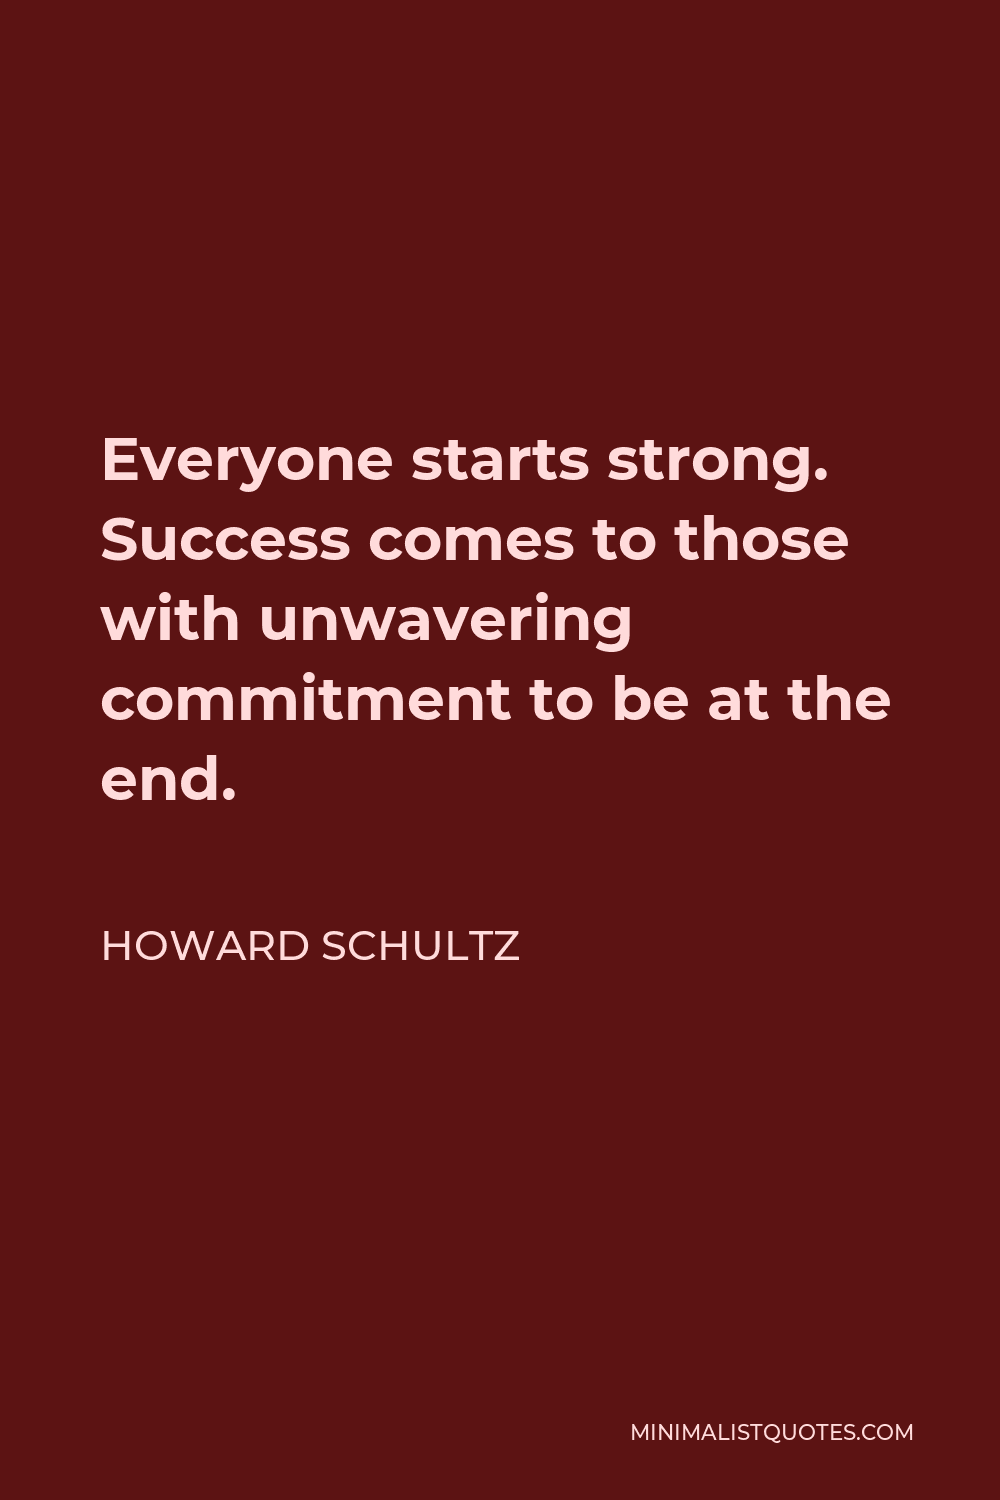 Howard Schultz Quote - Everyone starts strong. Success comes to those with unwavering commitment to be at the end.